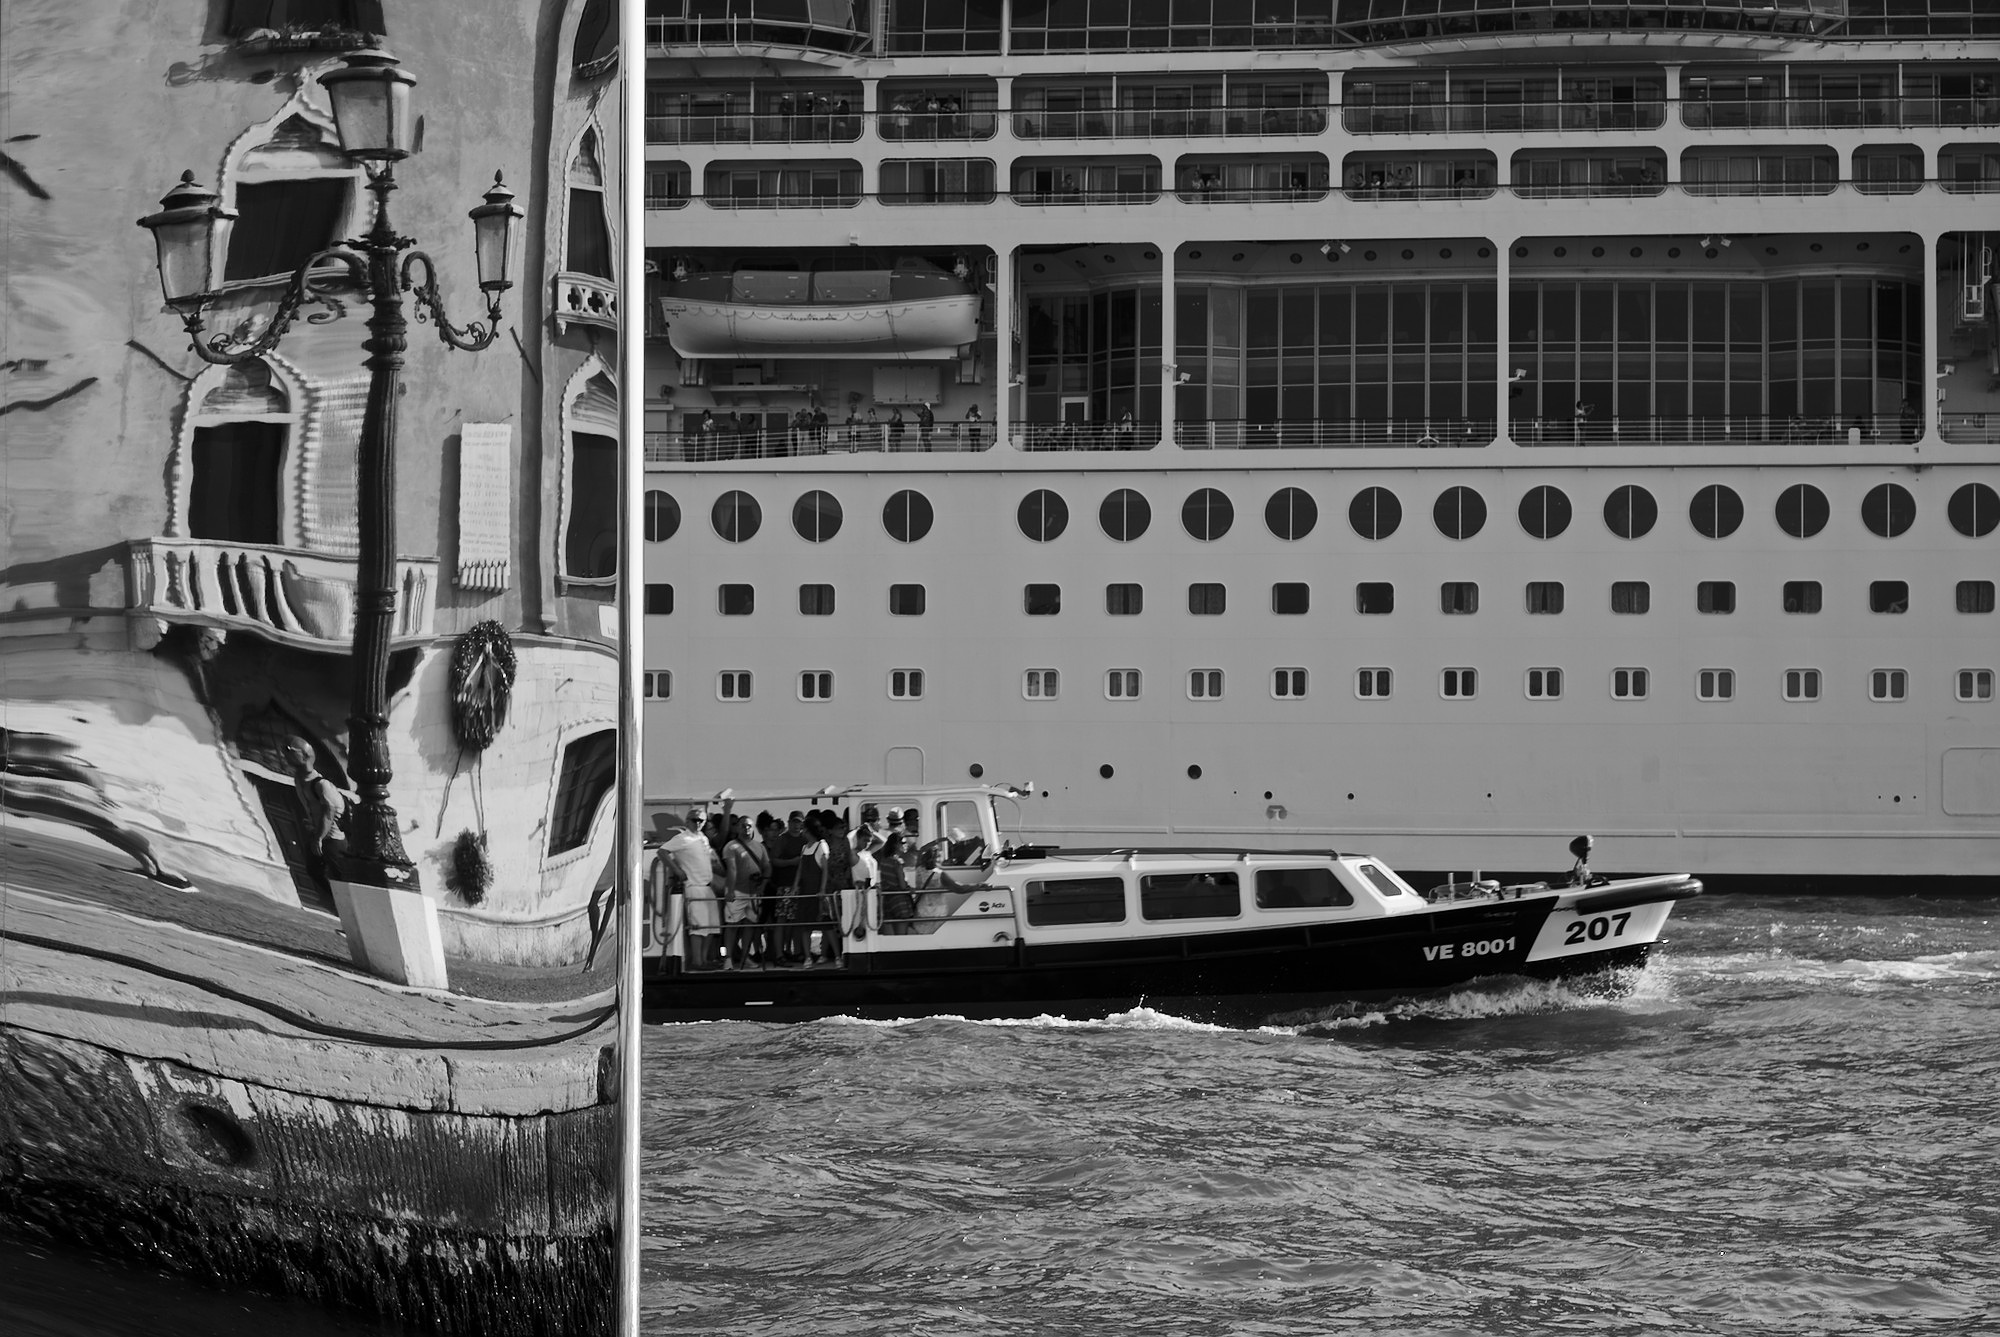 Boats and people – Venice as a harbour